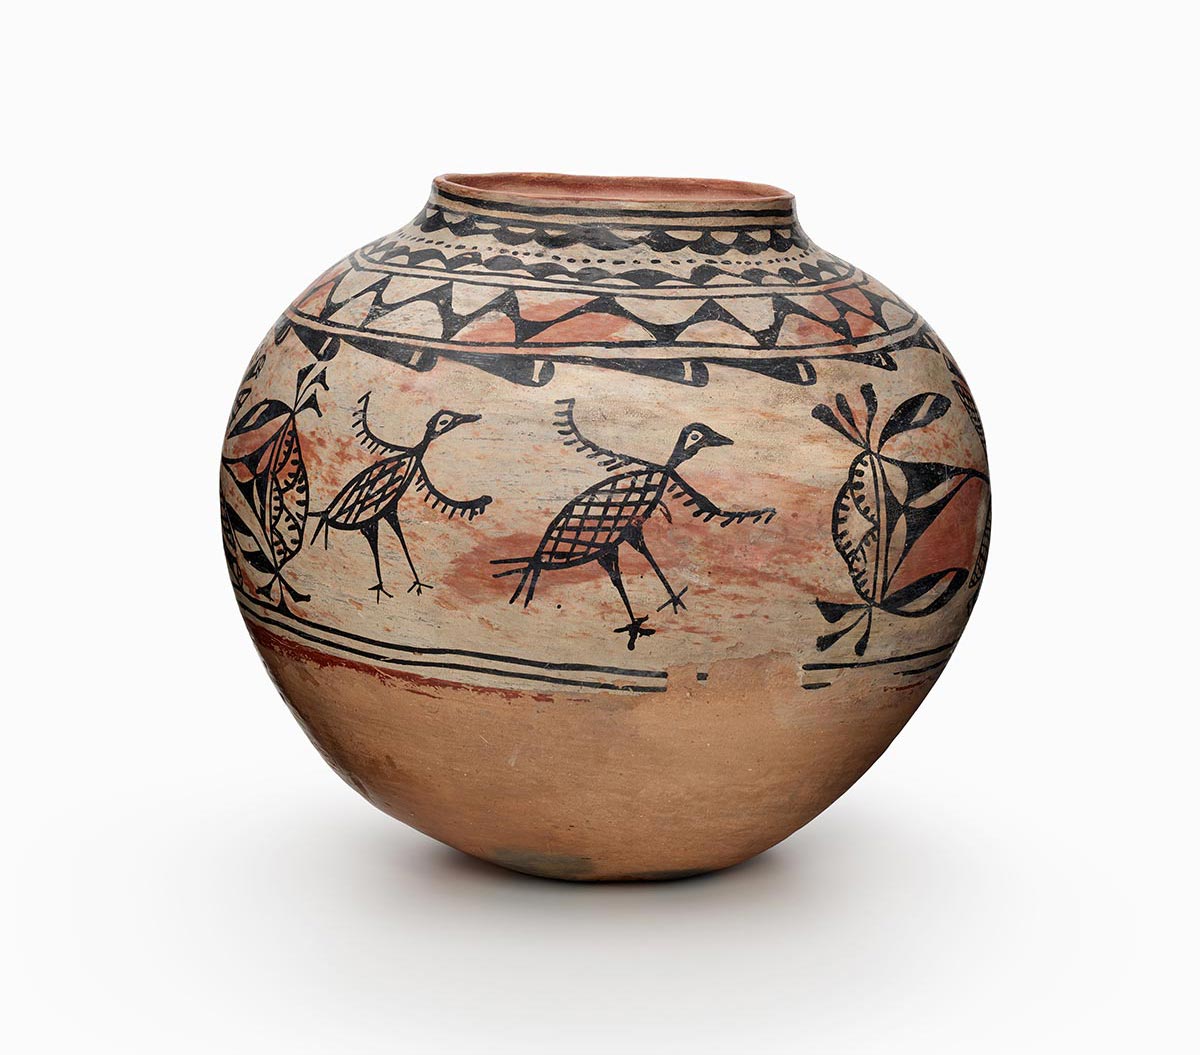 A Tesuque jar with bird forms that are framed with cloud banks and leaf motifs.